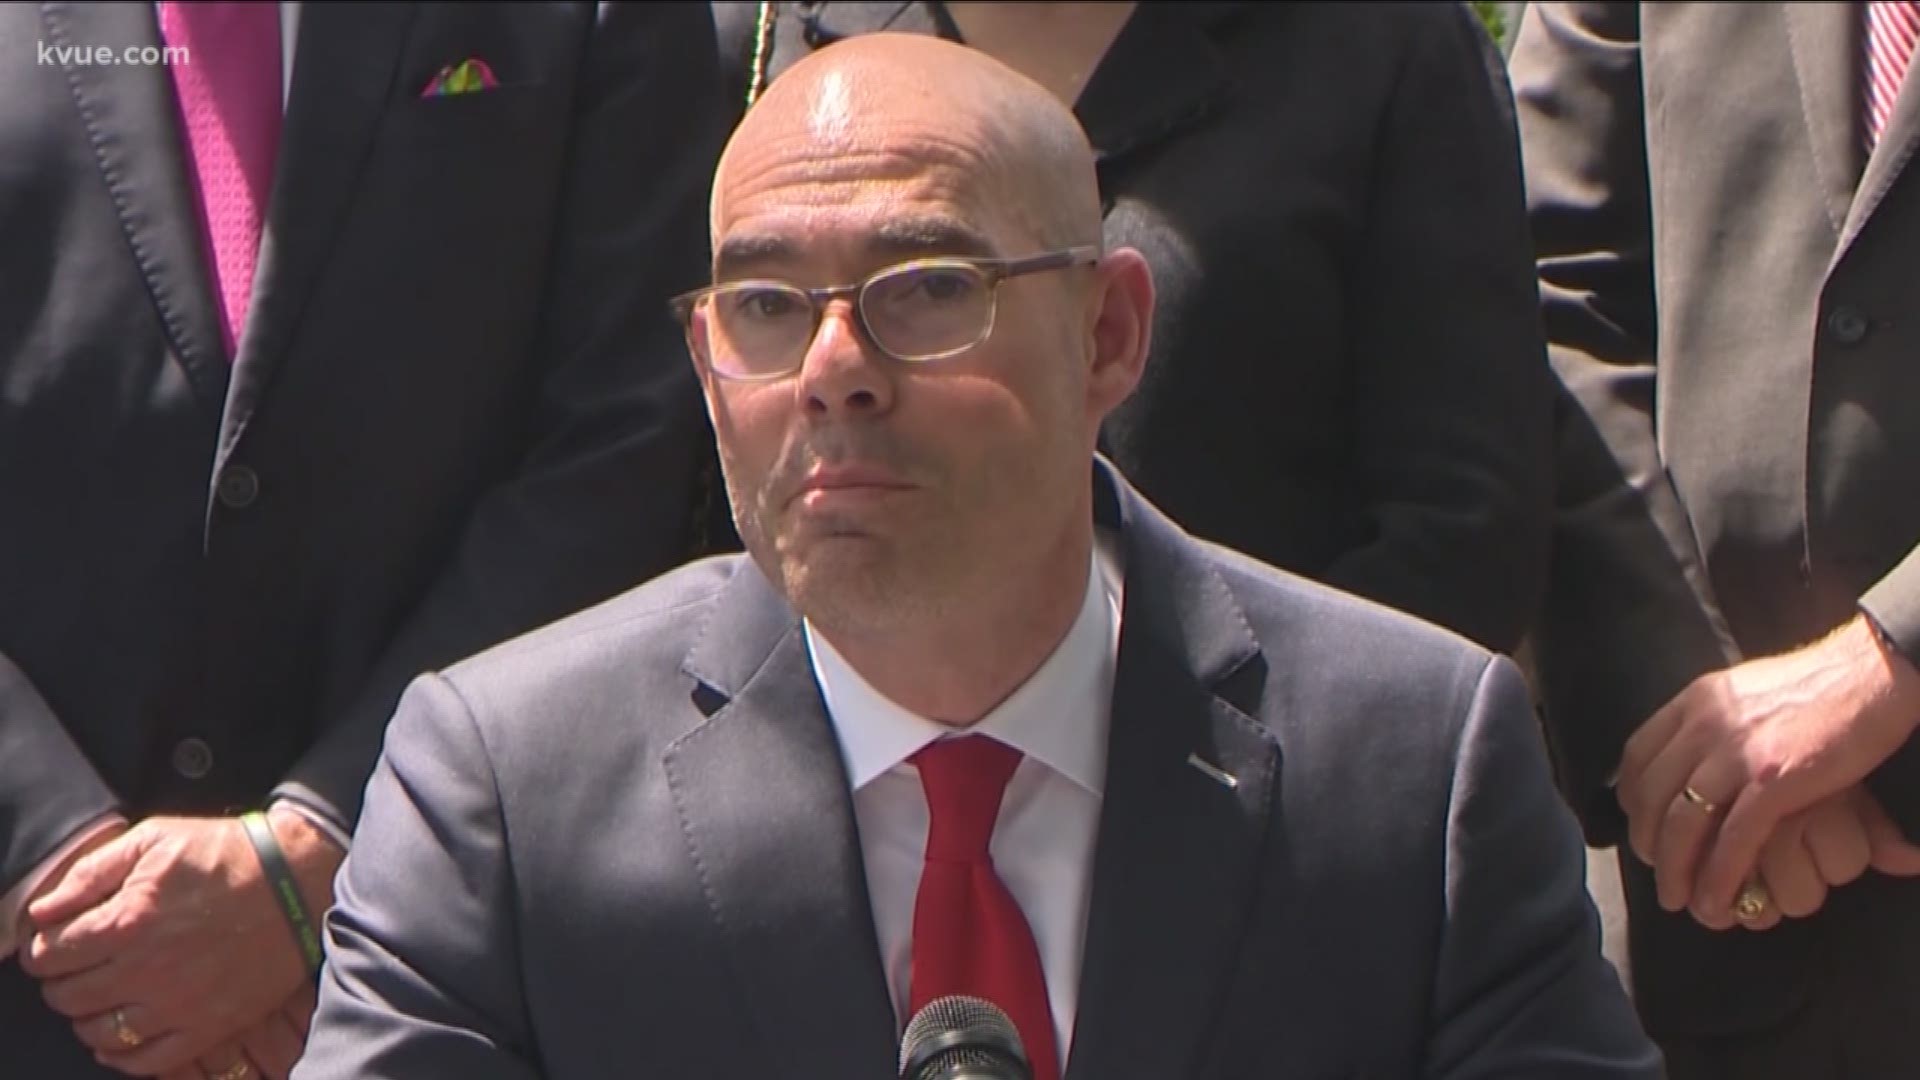 The CEO released the recording of a secret meeting between himself, Dennis Bonnen and a representative.